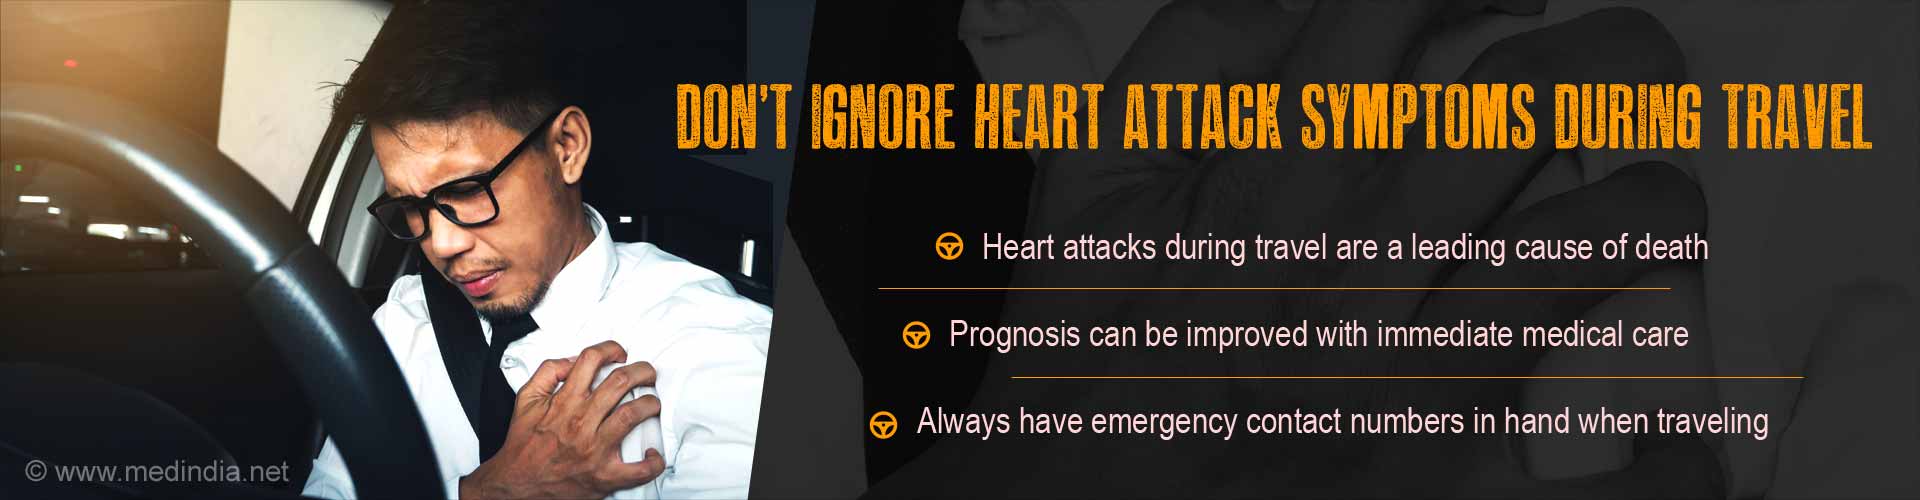 Don't ignore heart attack symptoms during travel. Heart attacks during travel are a leading cause of death. Prognosis can be improved with immediate medical care. Always have emergency contact numbers in hand when traveling.
